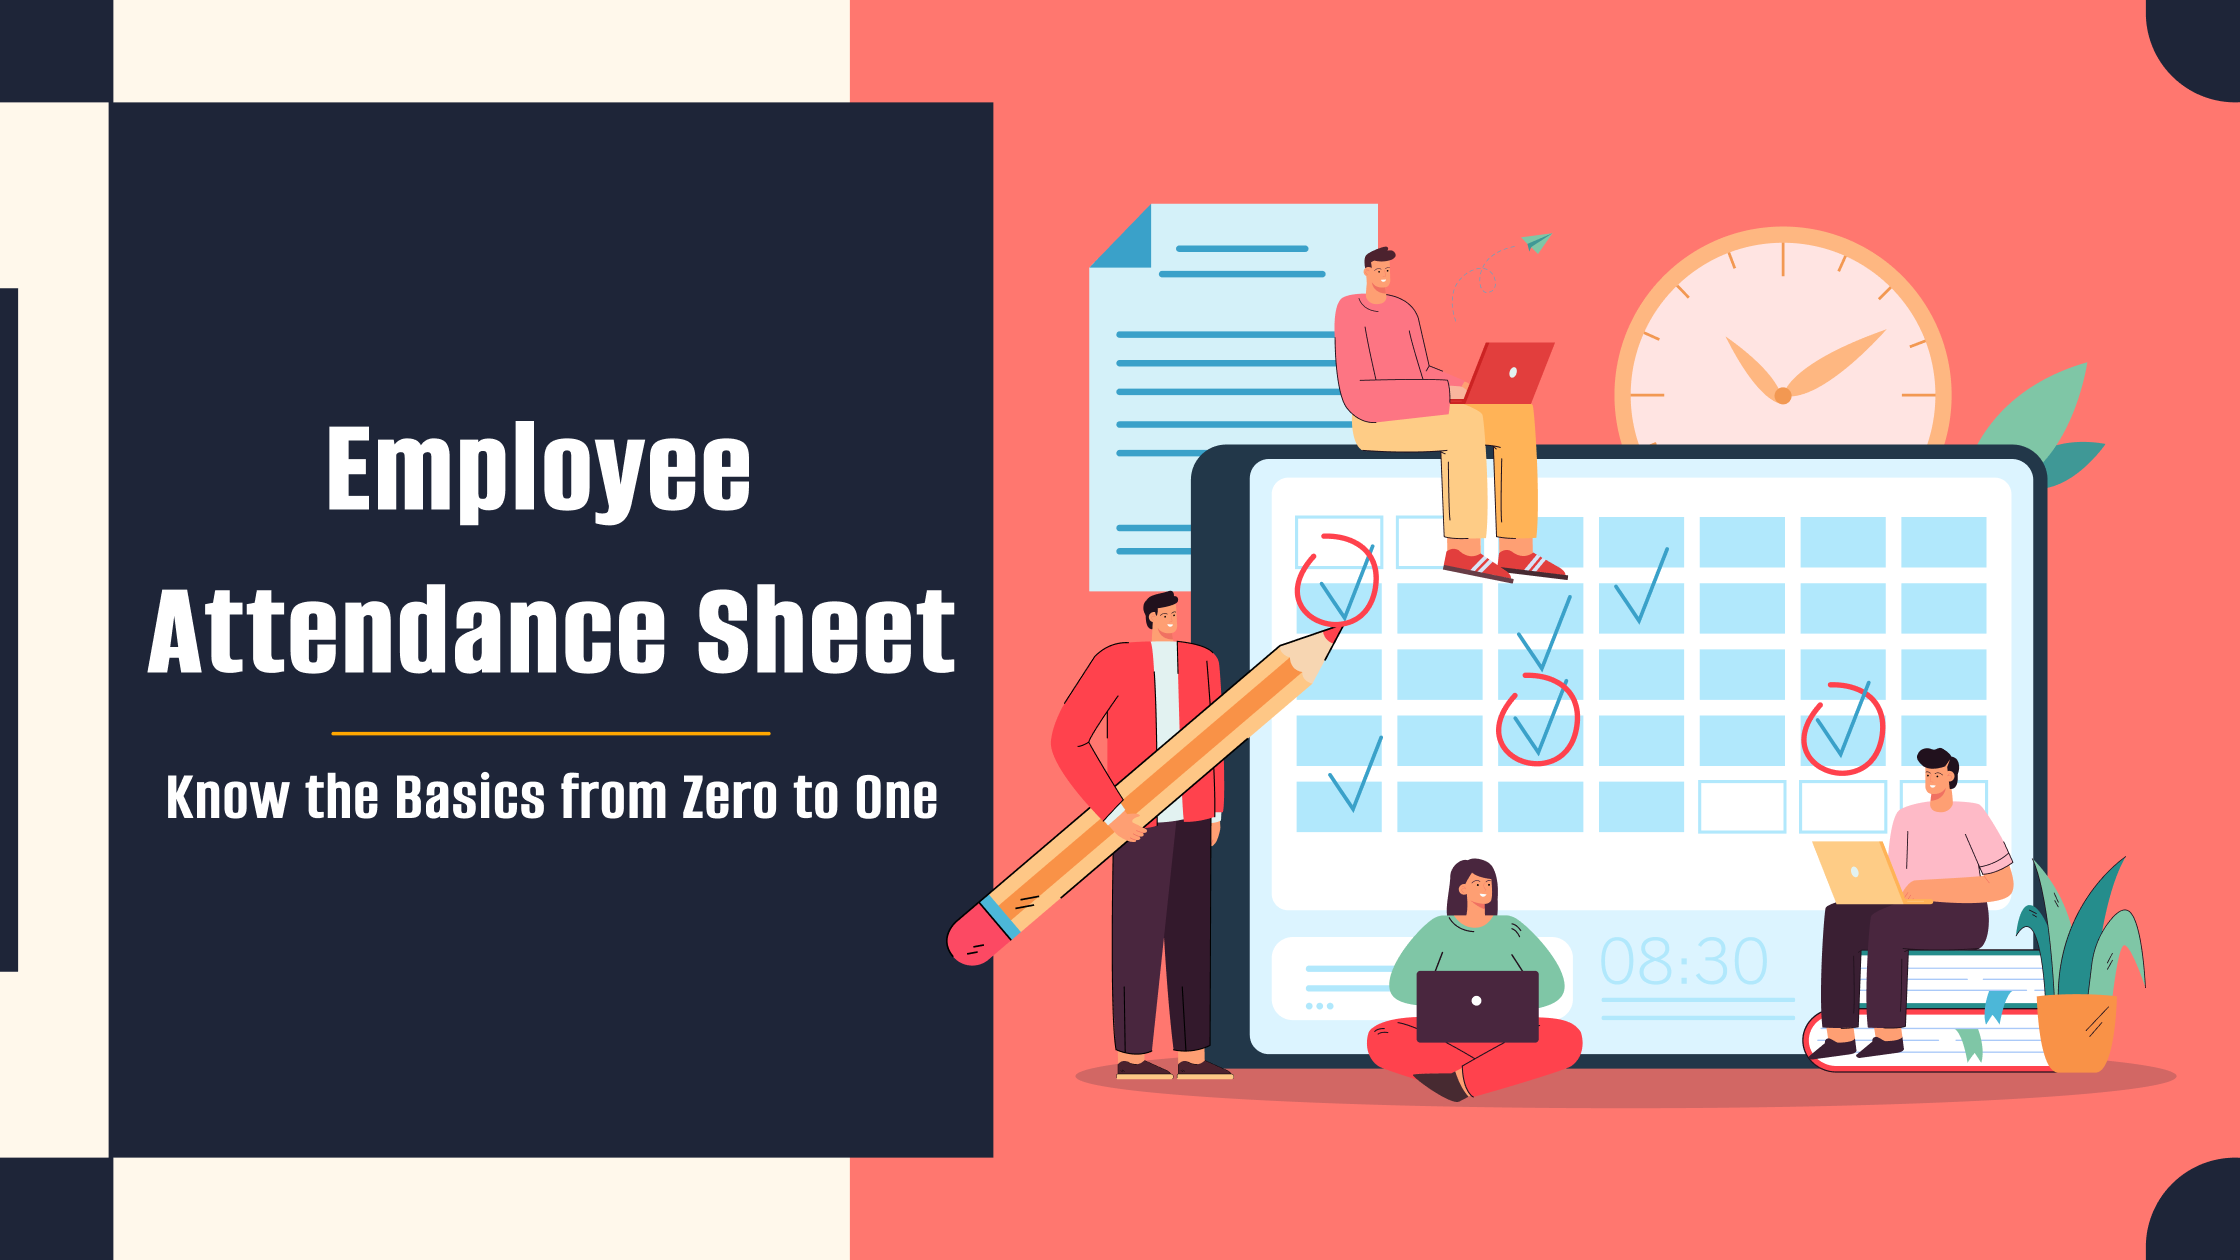 Employee Attendance Sheet Know the Basics from Zero to One